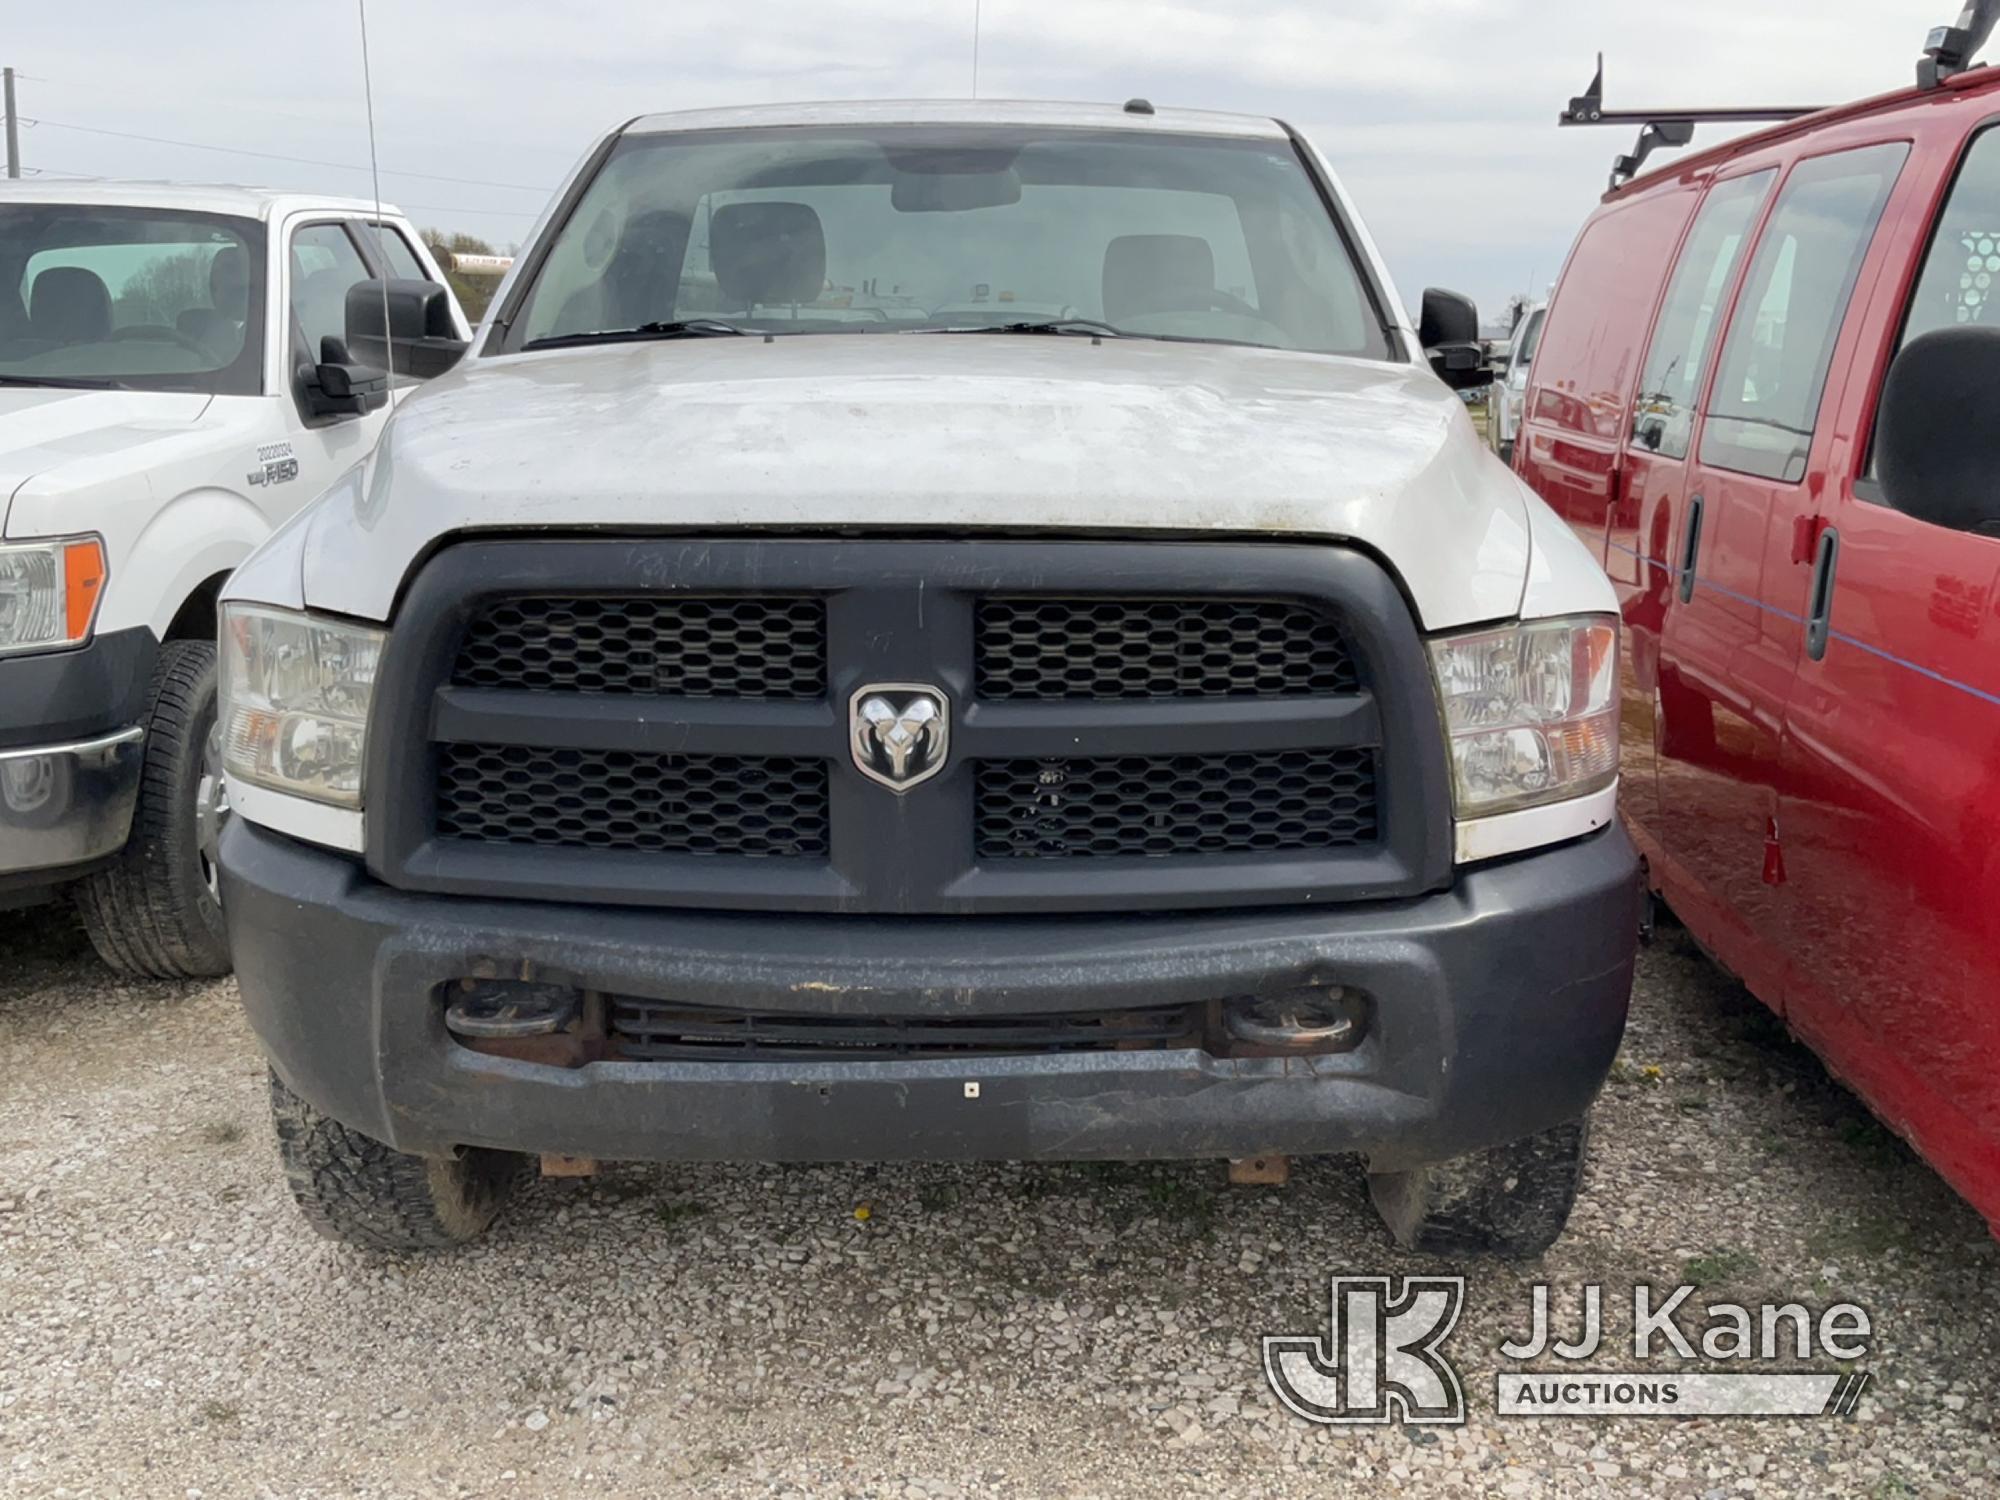 (Charlotte, MI) 2013 RAM 2500 4x4 Pickup Truck Not Running, Condition Unknown, No Crank with Jump, R